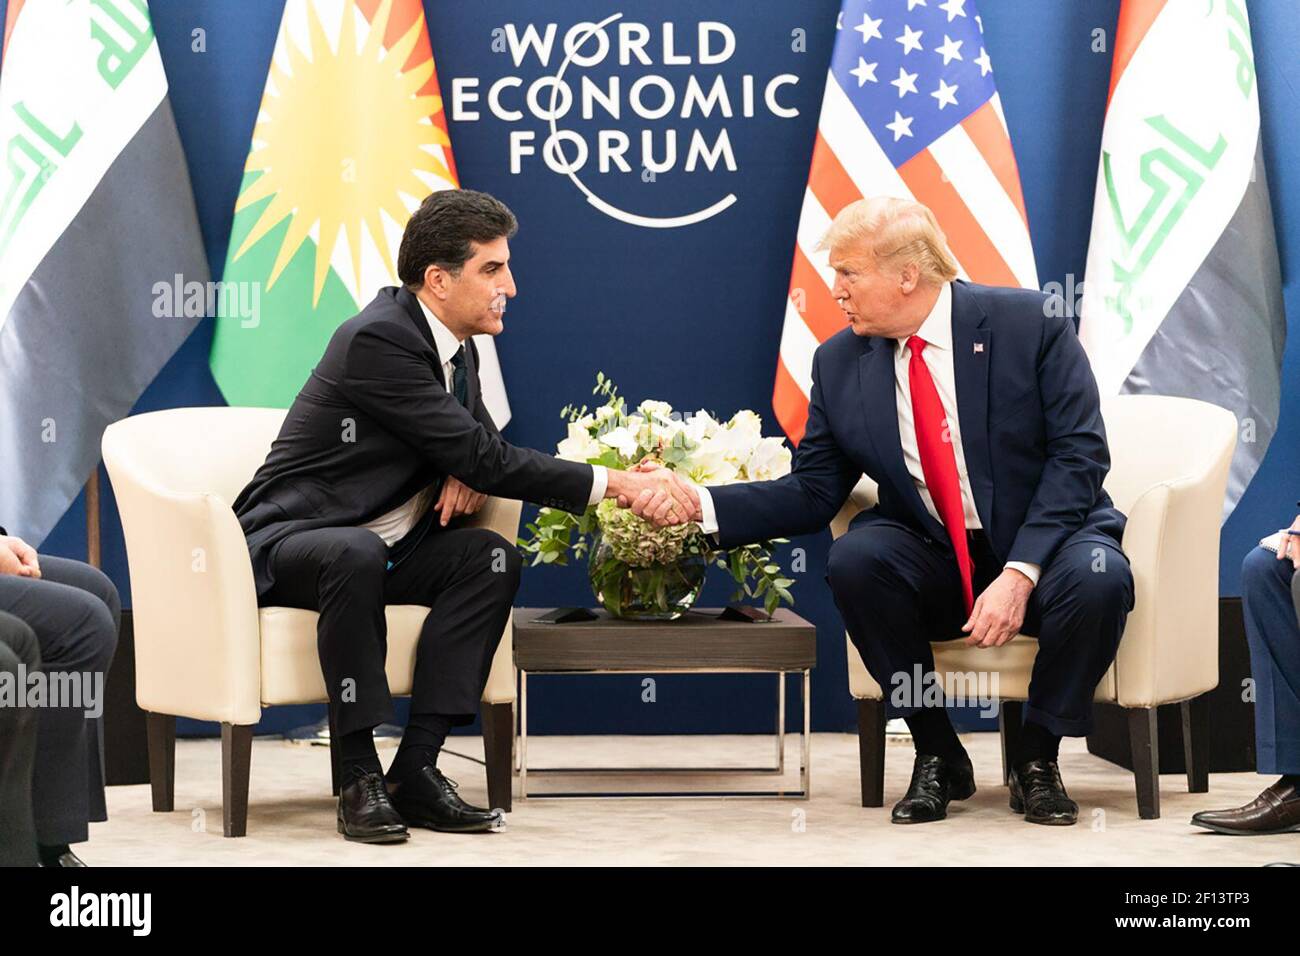 President Donald Trump meets with the President of the Kurdistan Regional Government Nechirvan Barzani Wednesday Jan. 22 2020 at the Davos Congress Centre in Davos Switzerland. Stock Photo